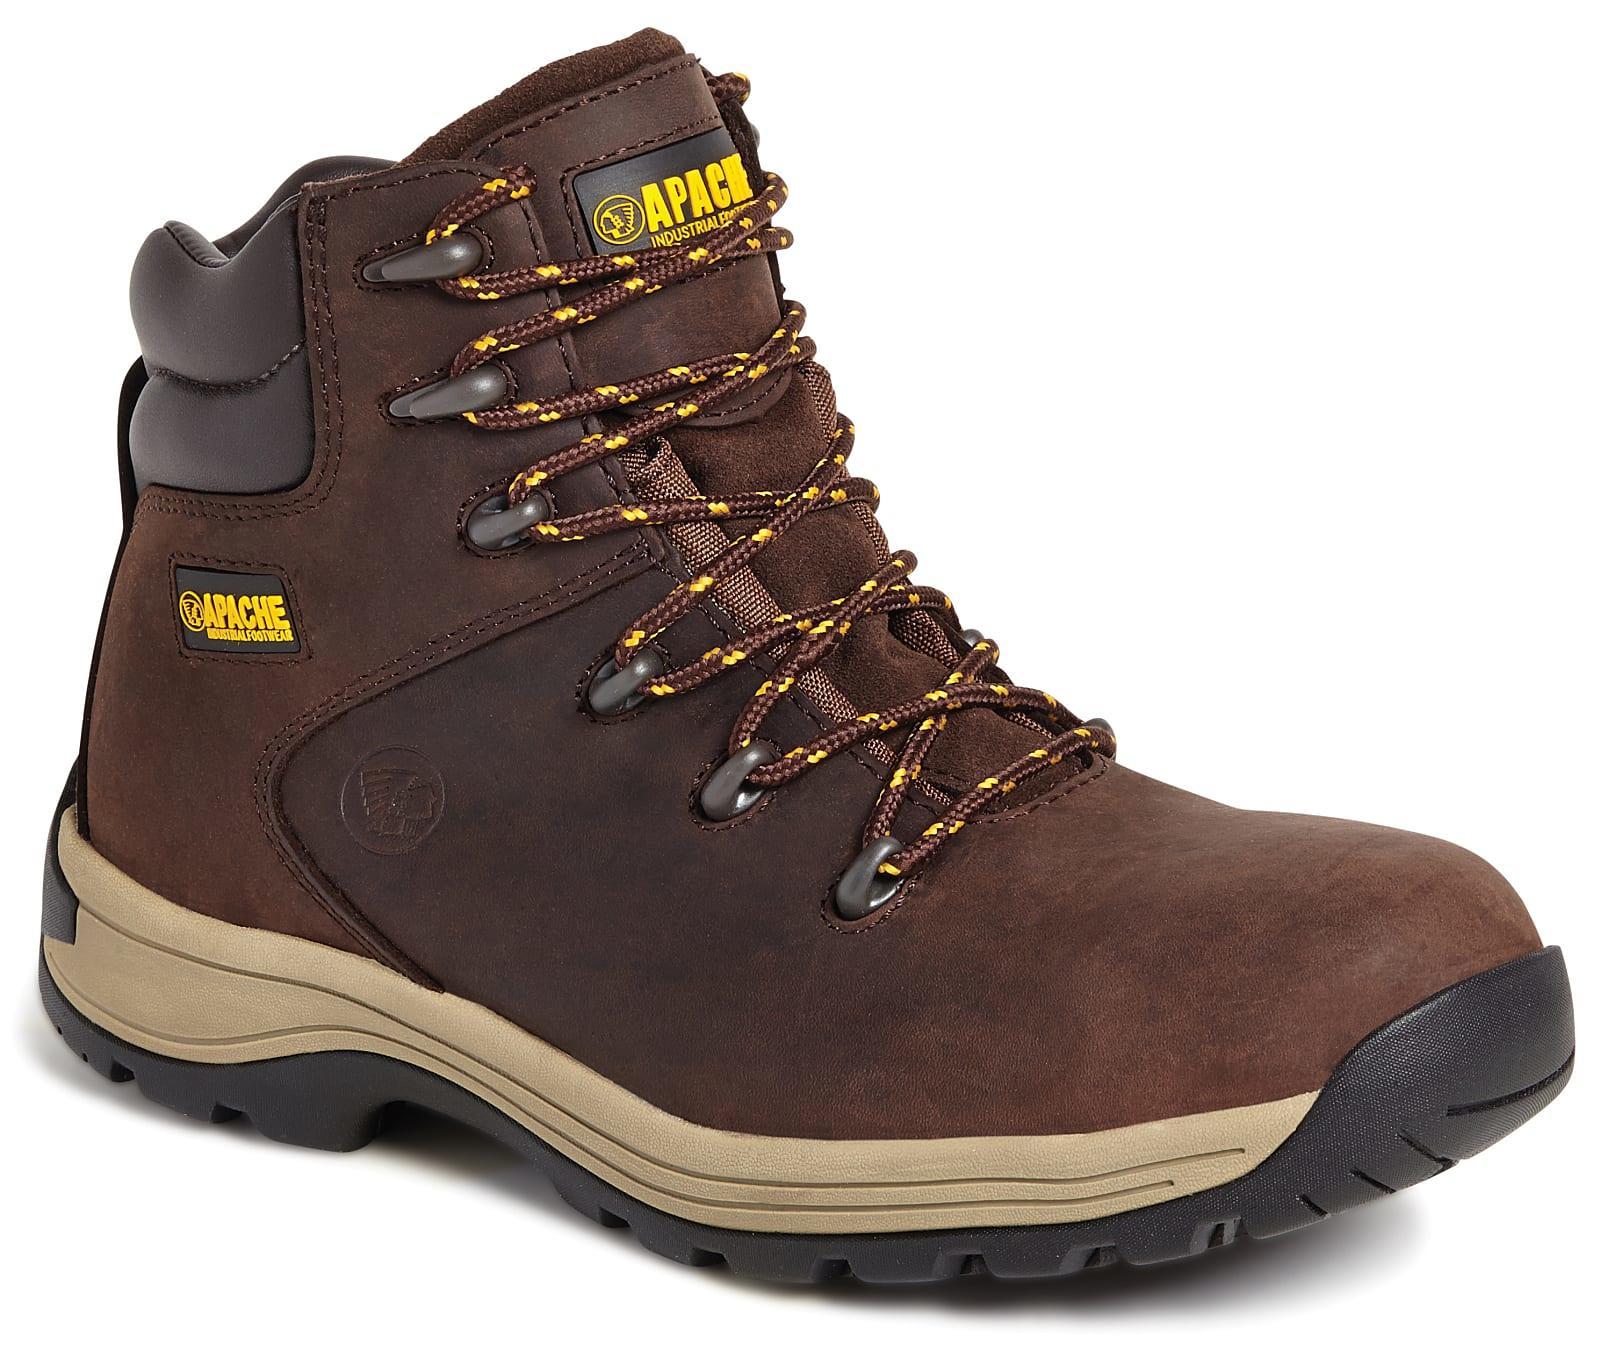 Apache AP315CM Safety Hiker Boots in Brown (Product Code: AP315CM)